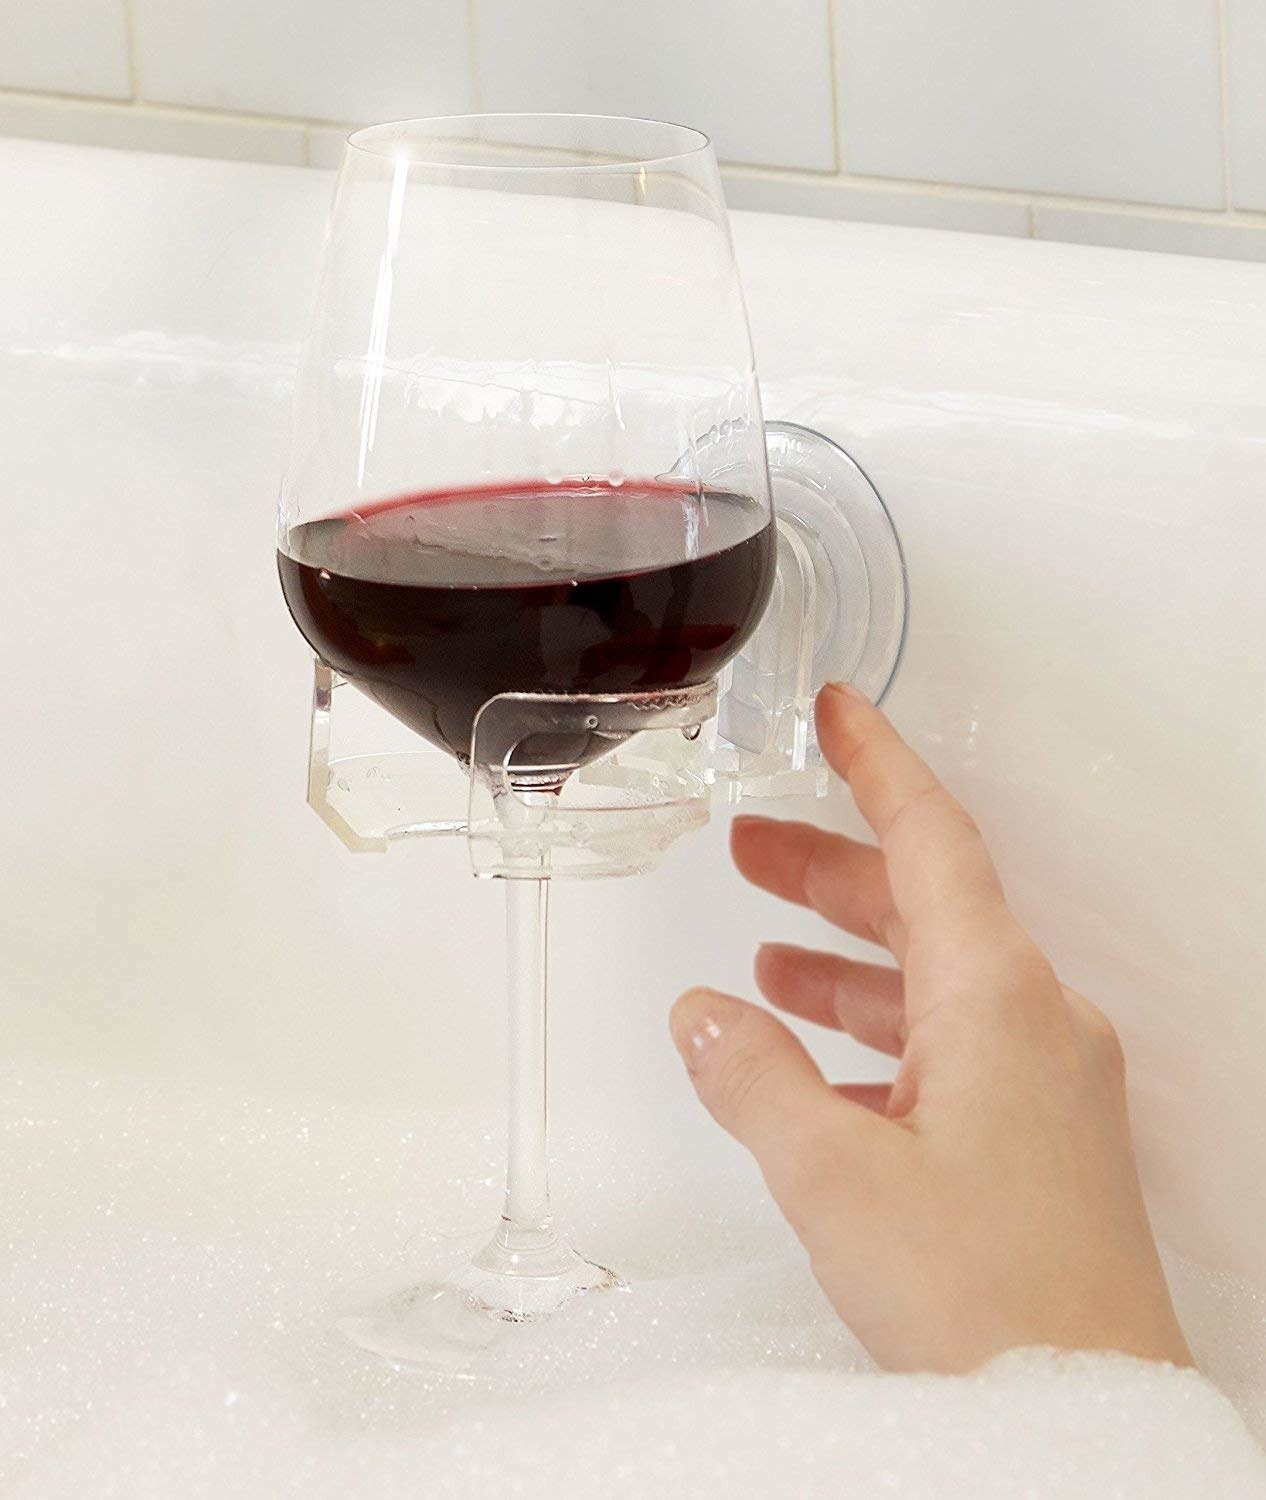 bubble bath with wine suction cupped to side of tub